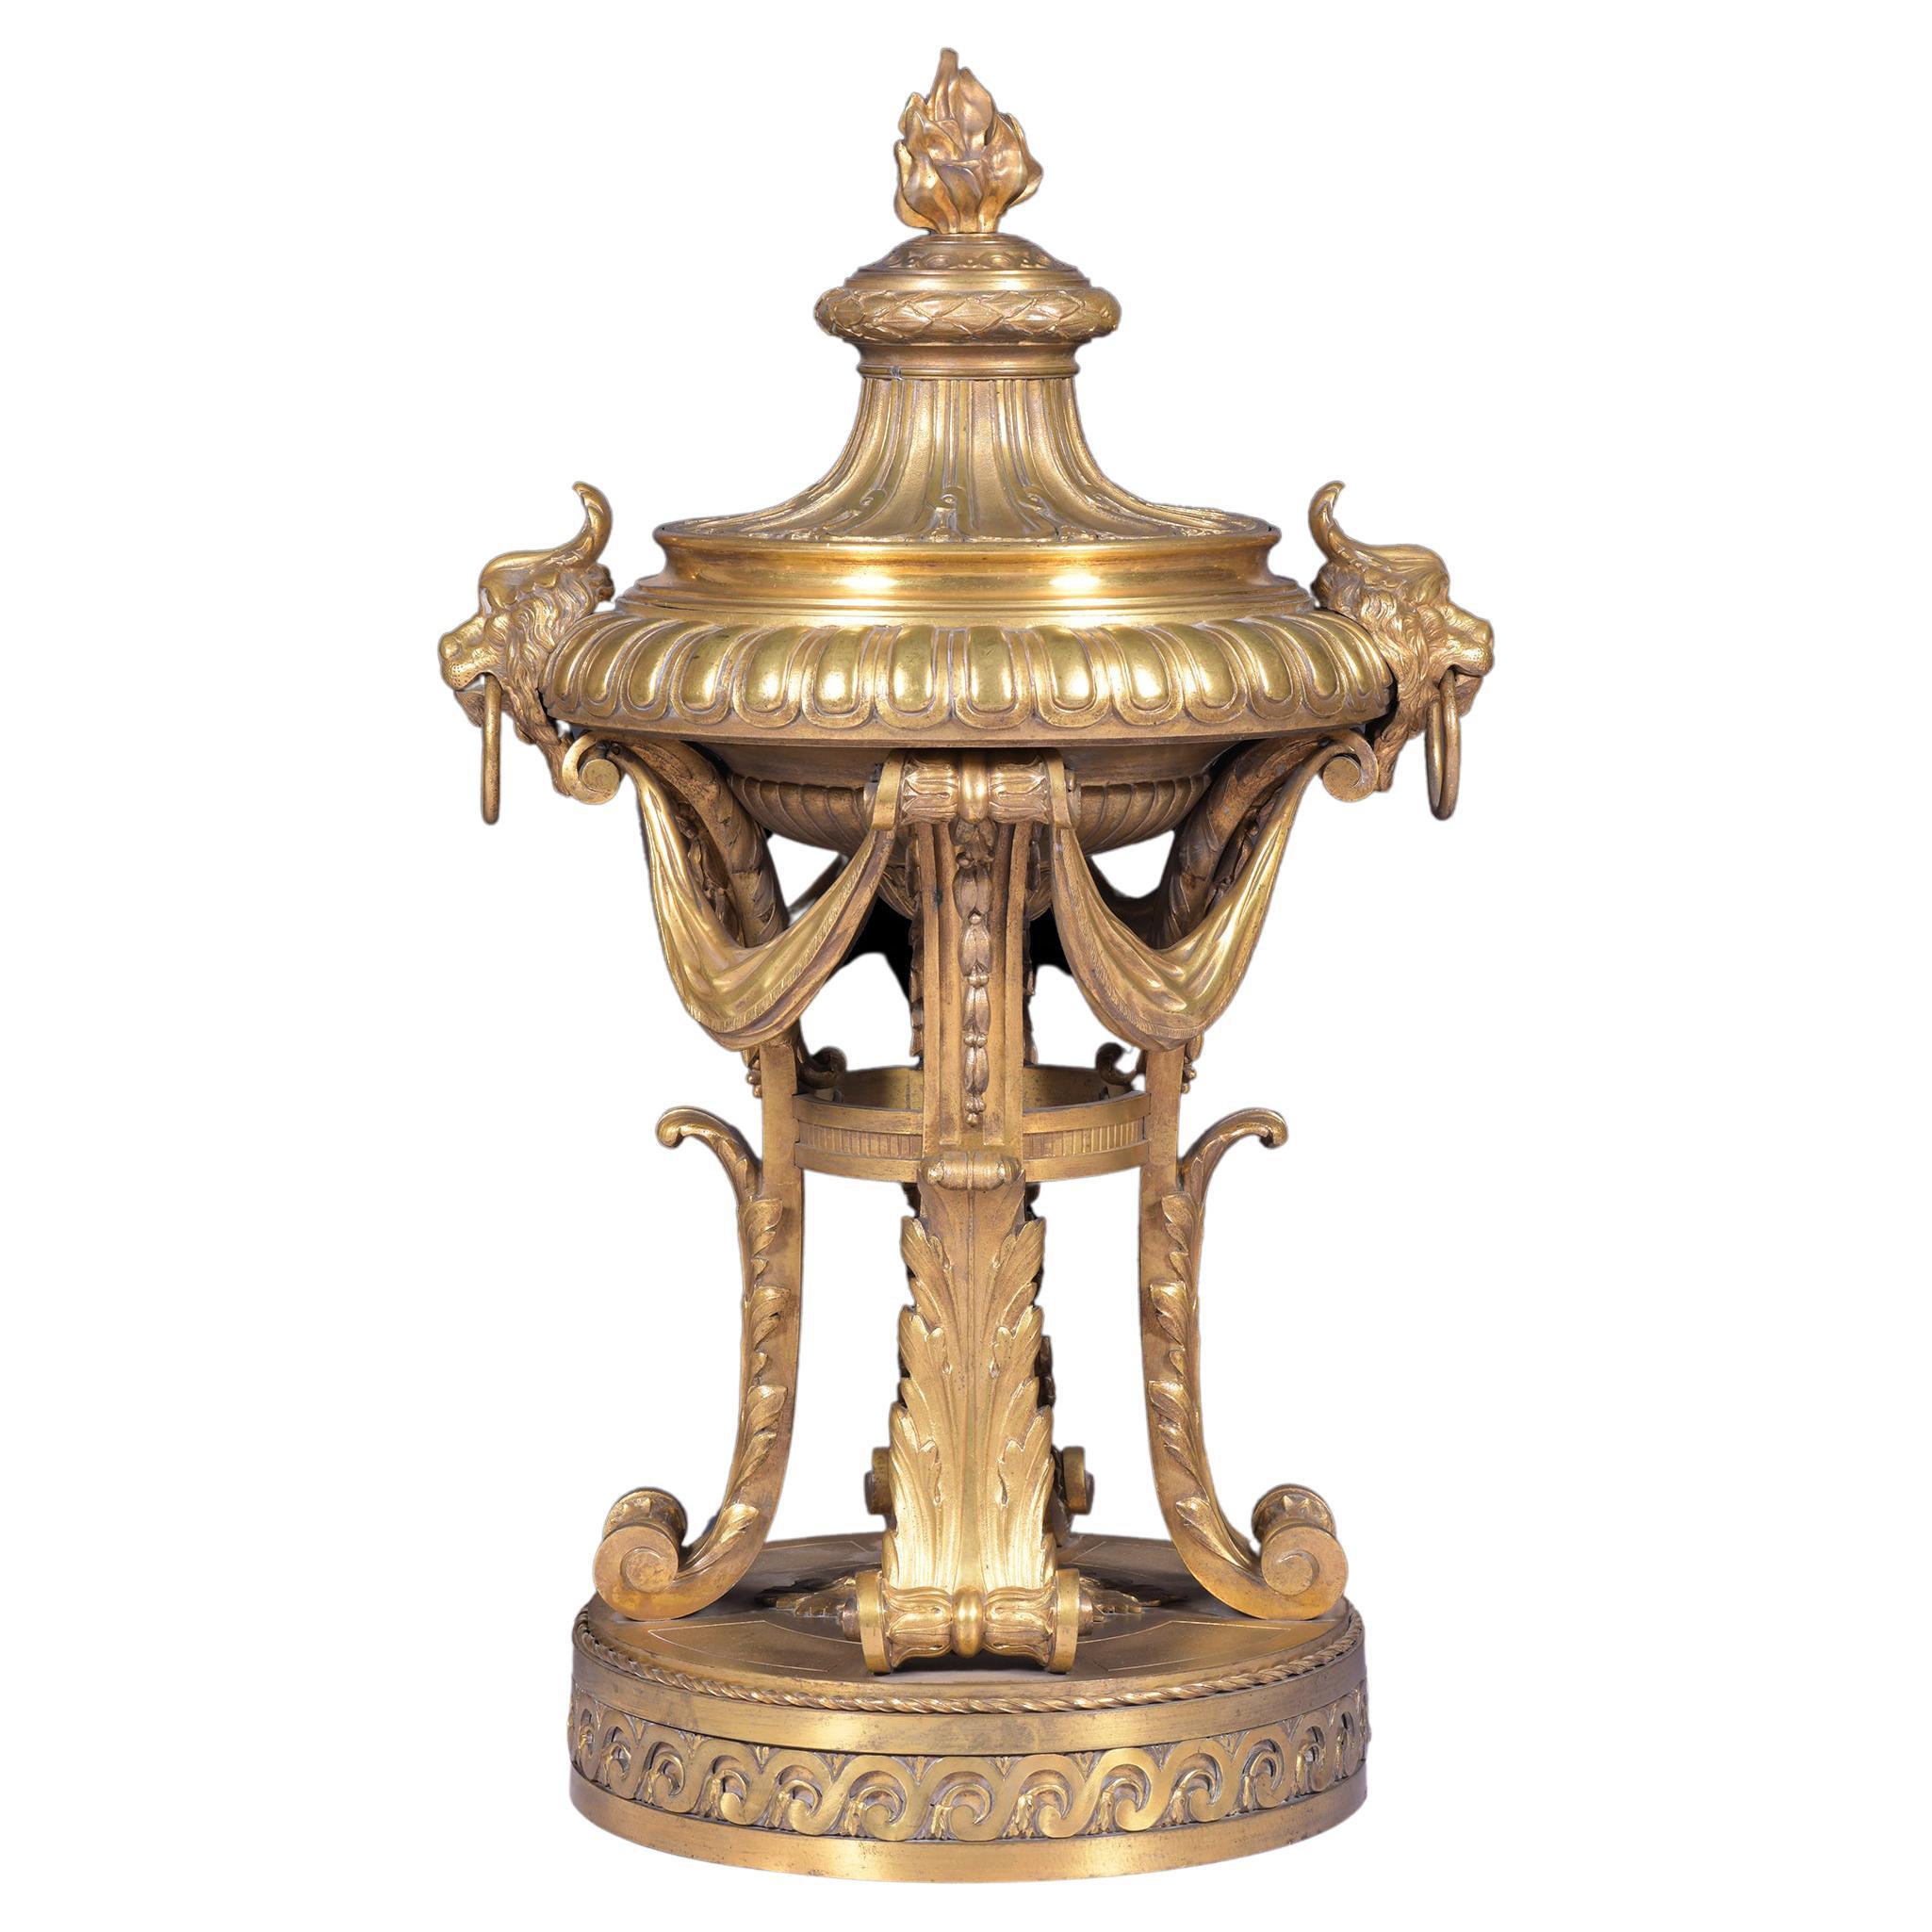 19th Century French Ormolu Centre Piece in the Louis XVI Style